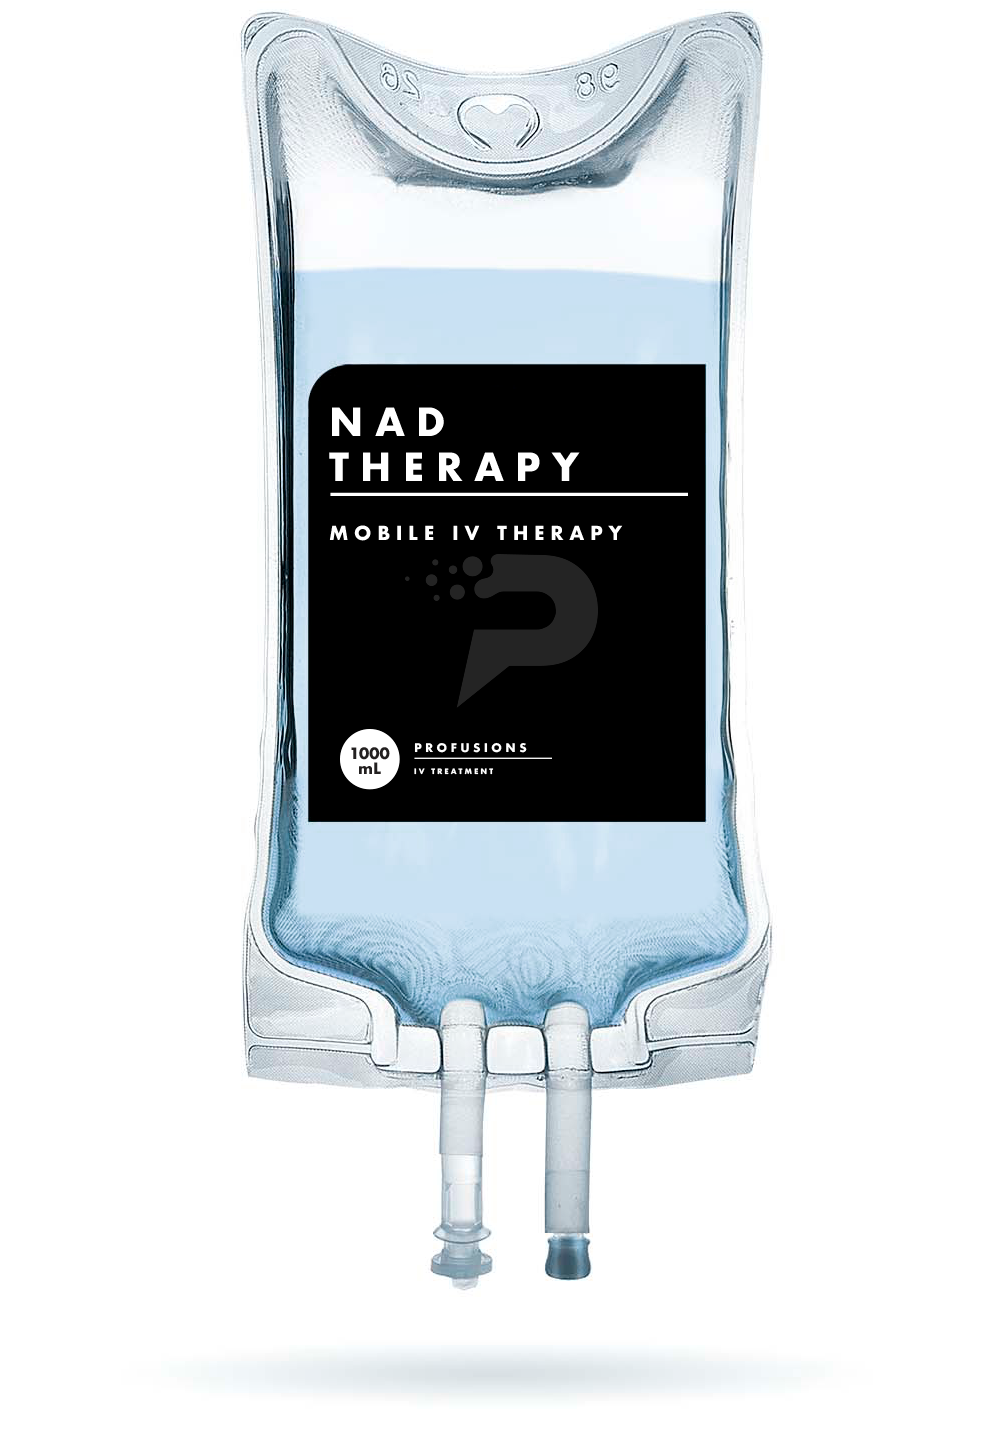 NAD+ IV therapy